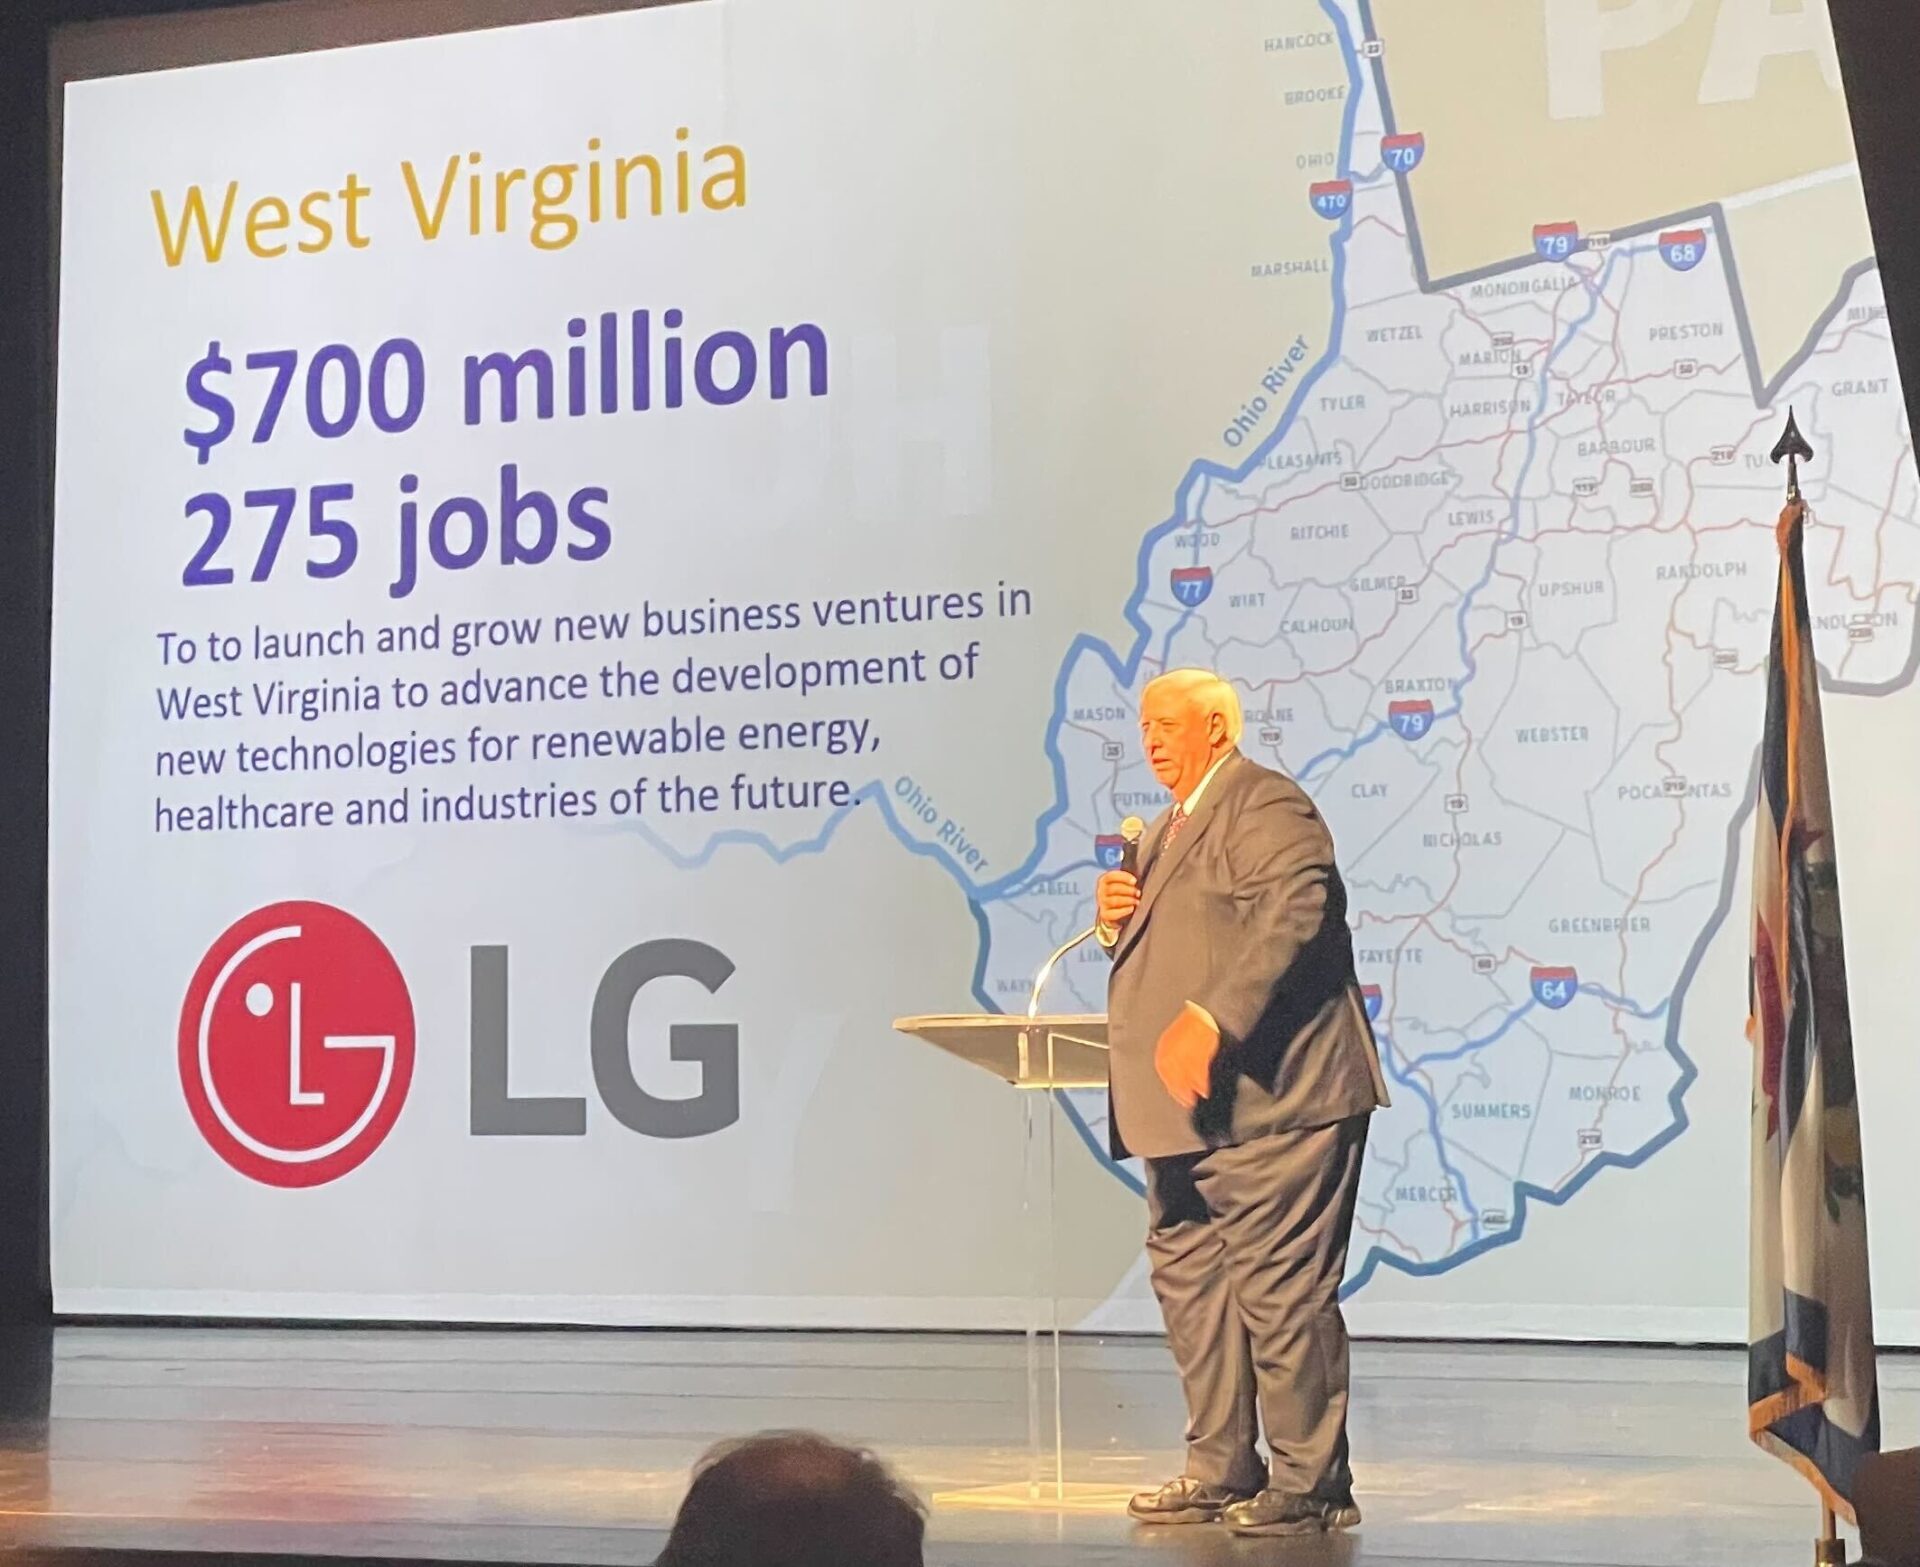 LG To Invest $700 Million In West Virginia